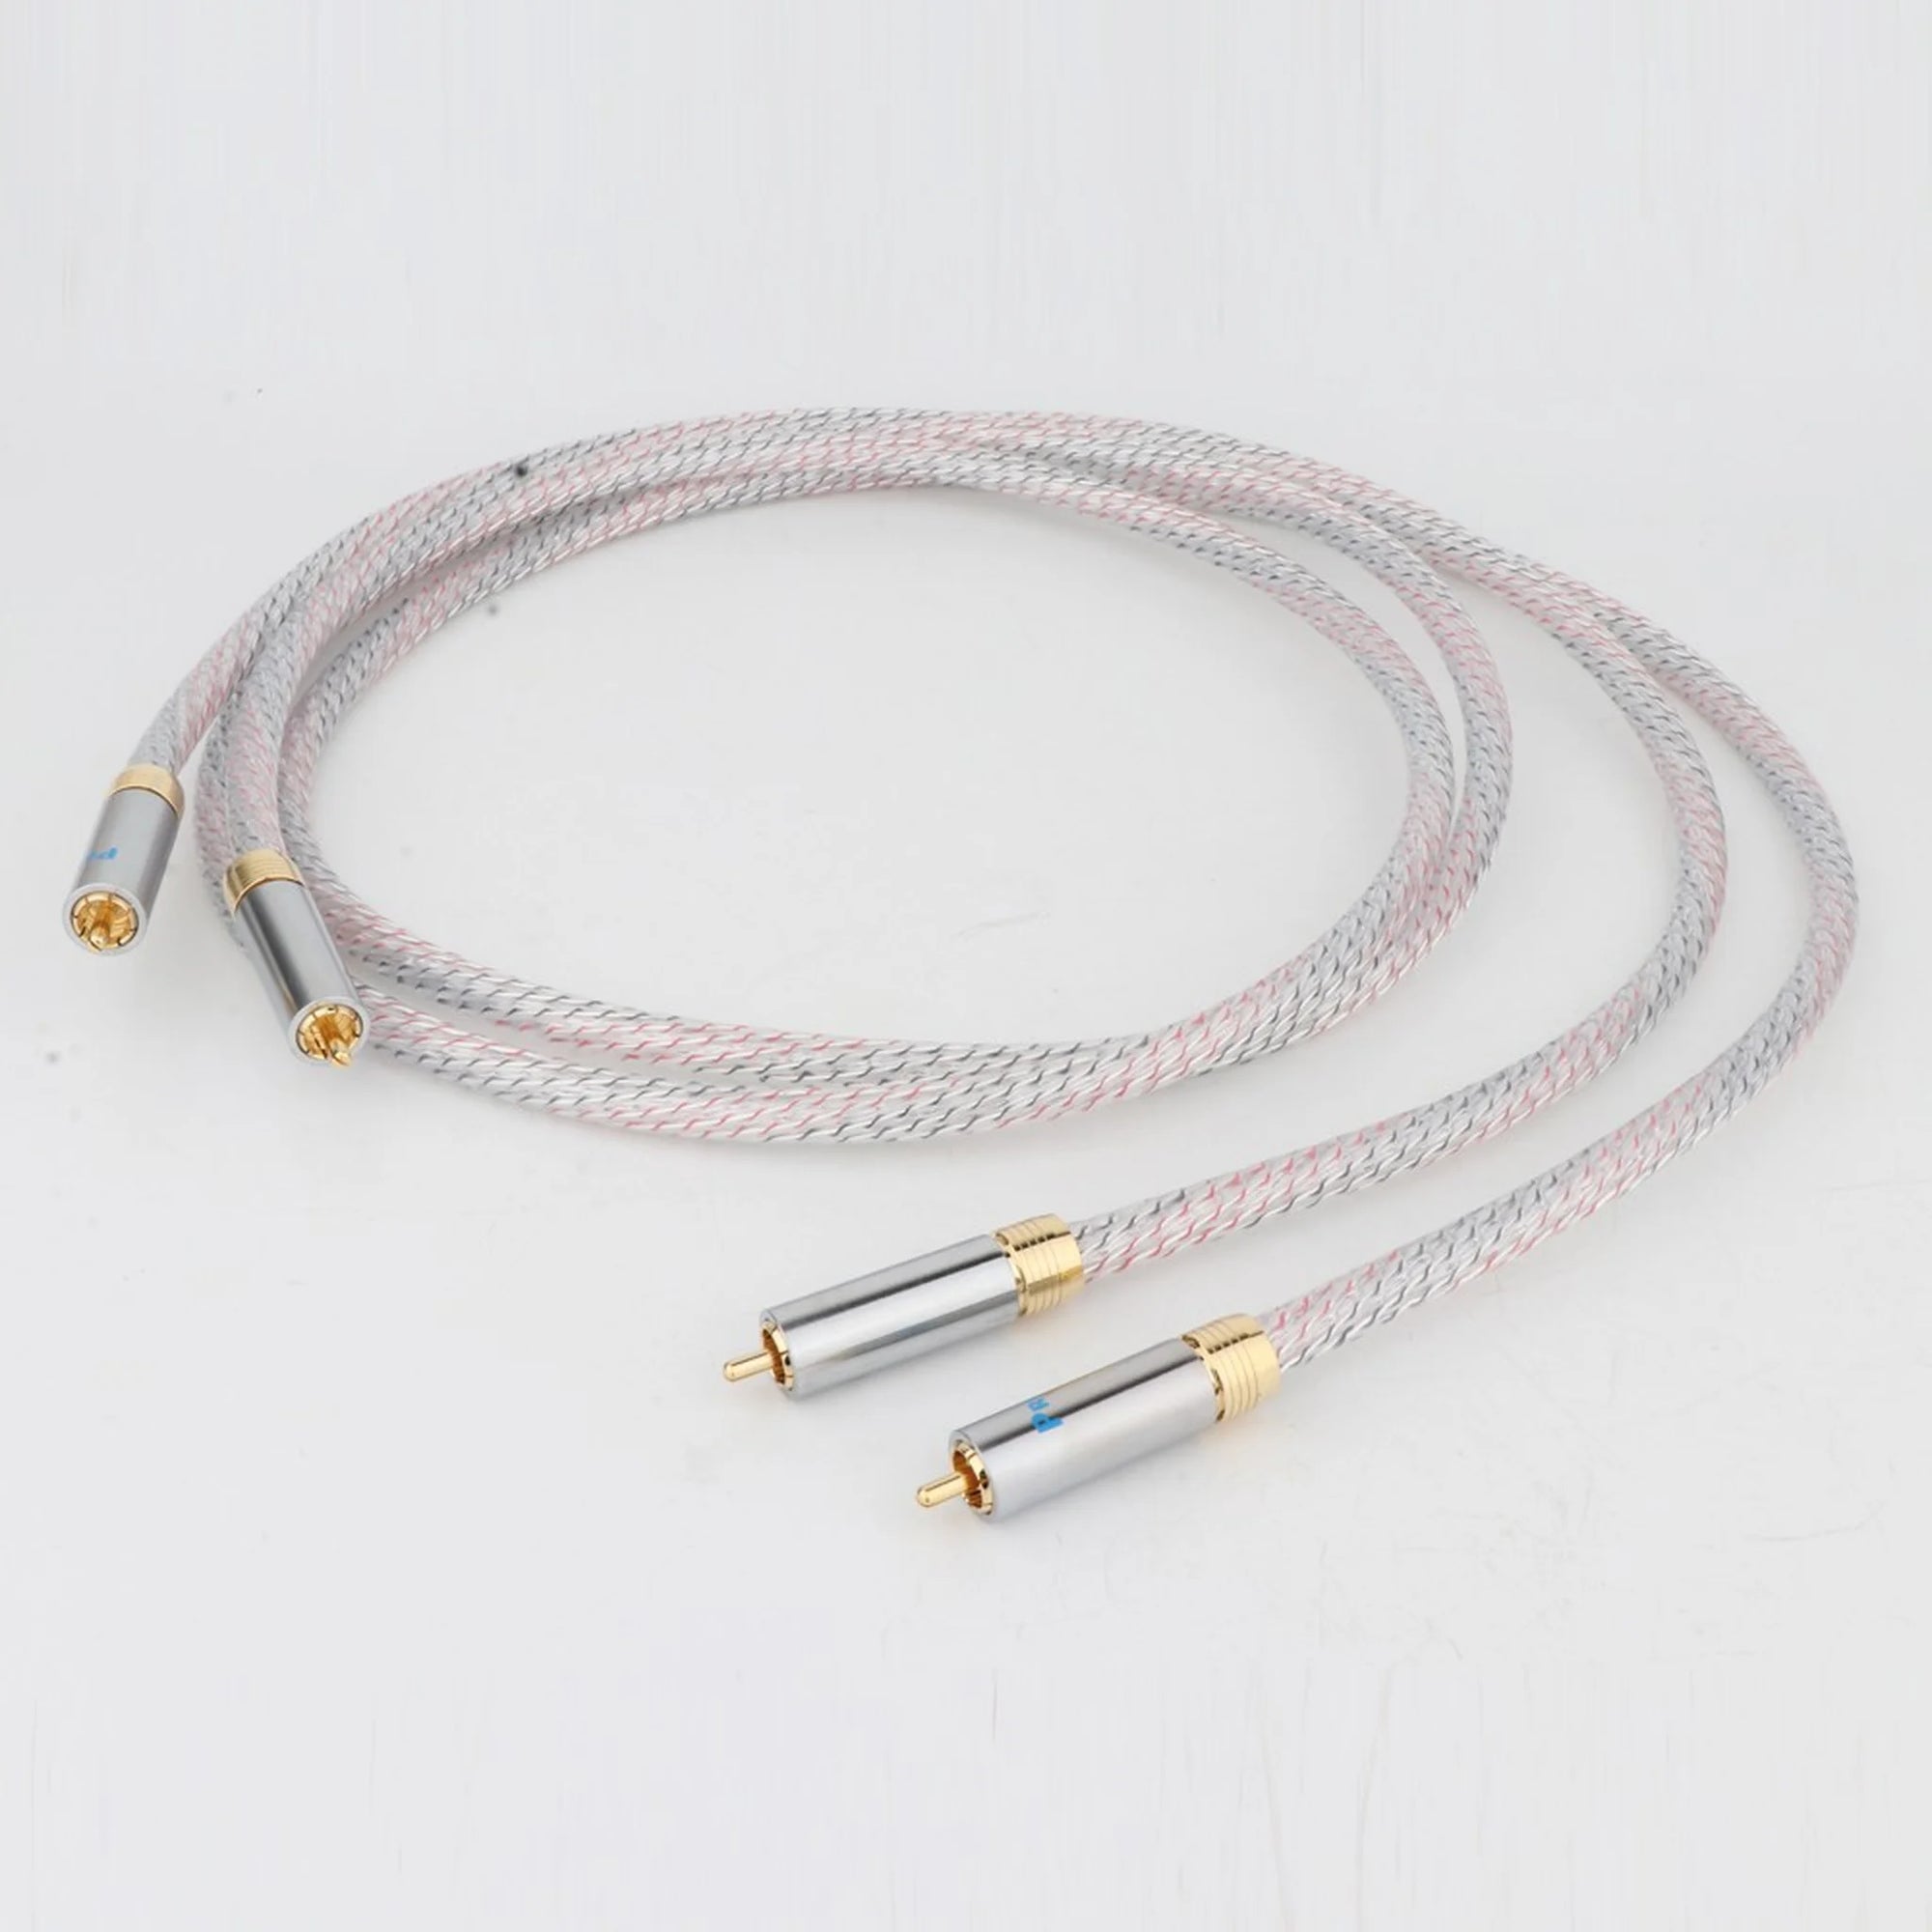 Nordost Valhalla 7N silver plated audio RCA Cable